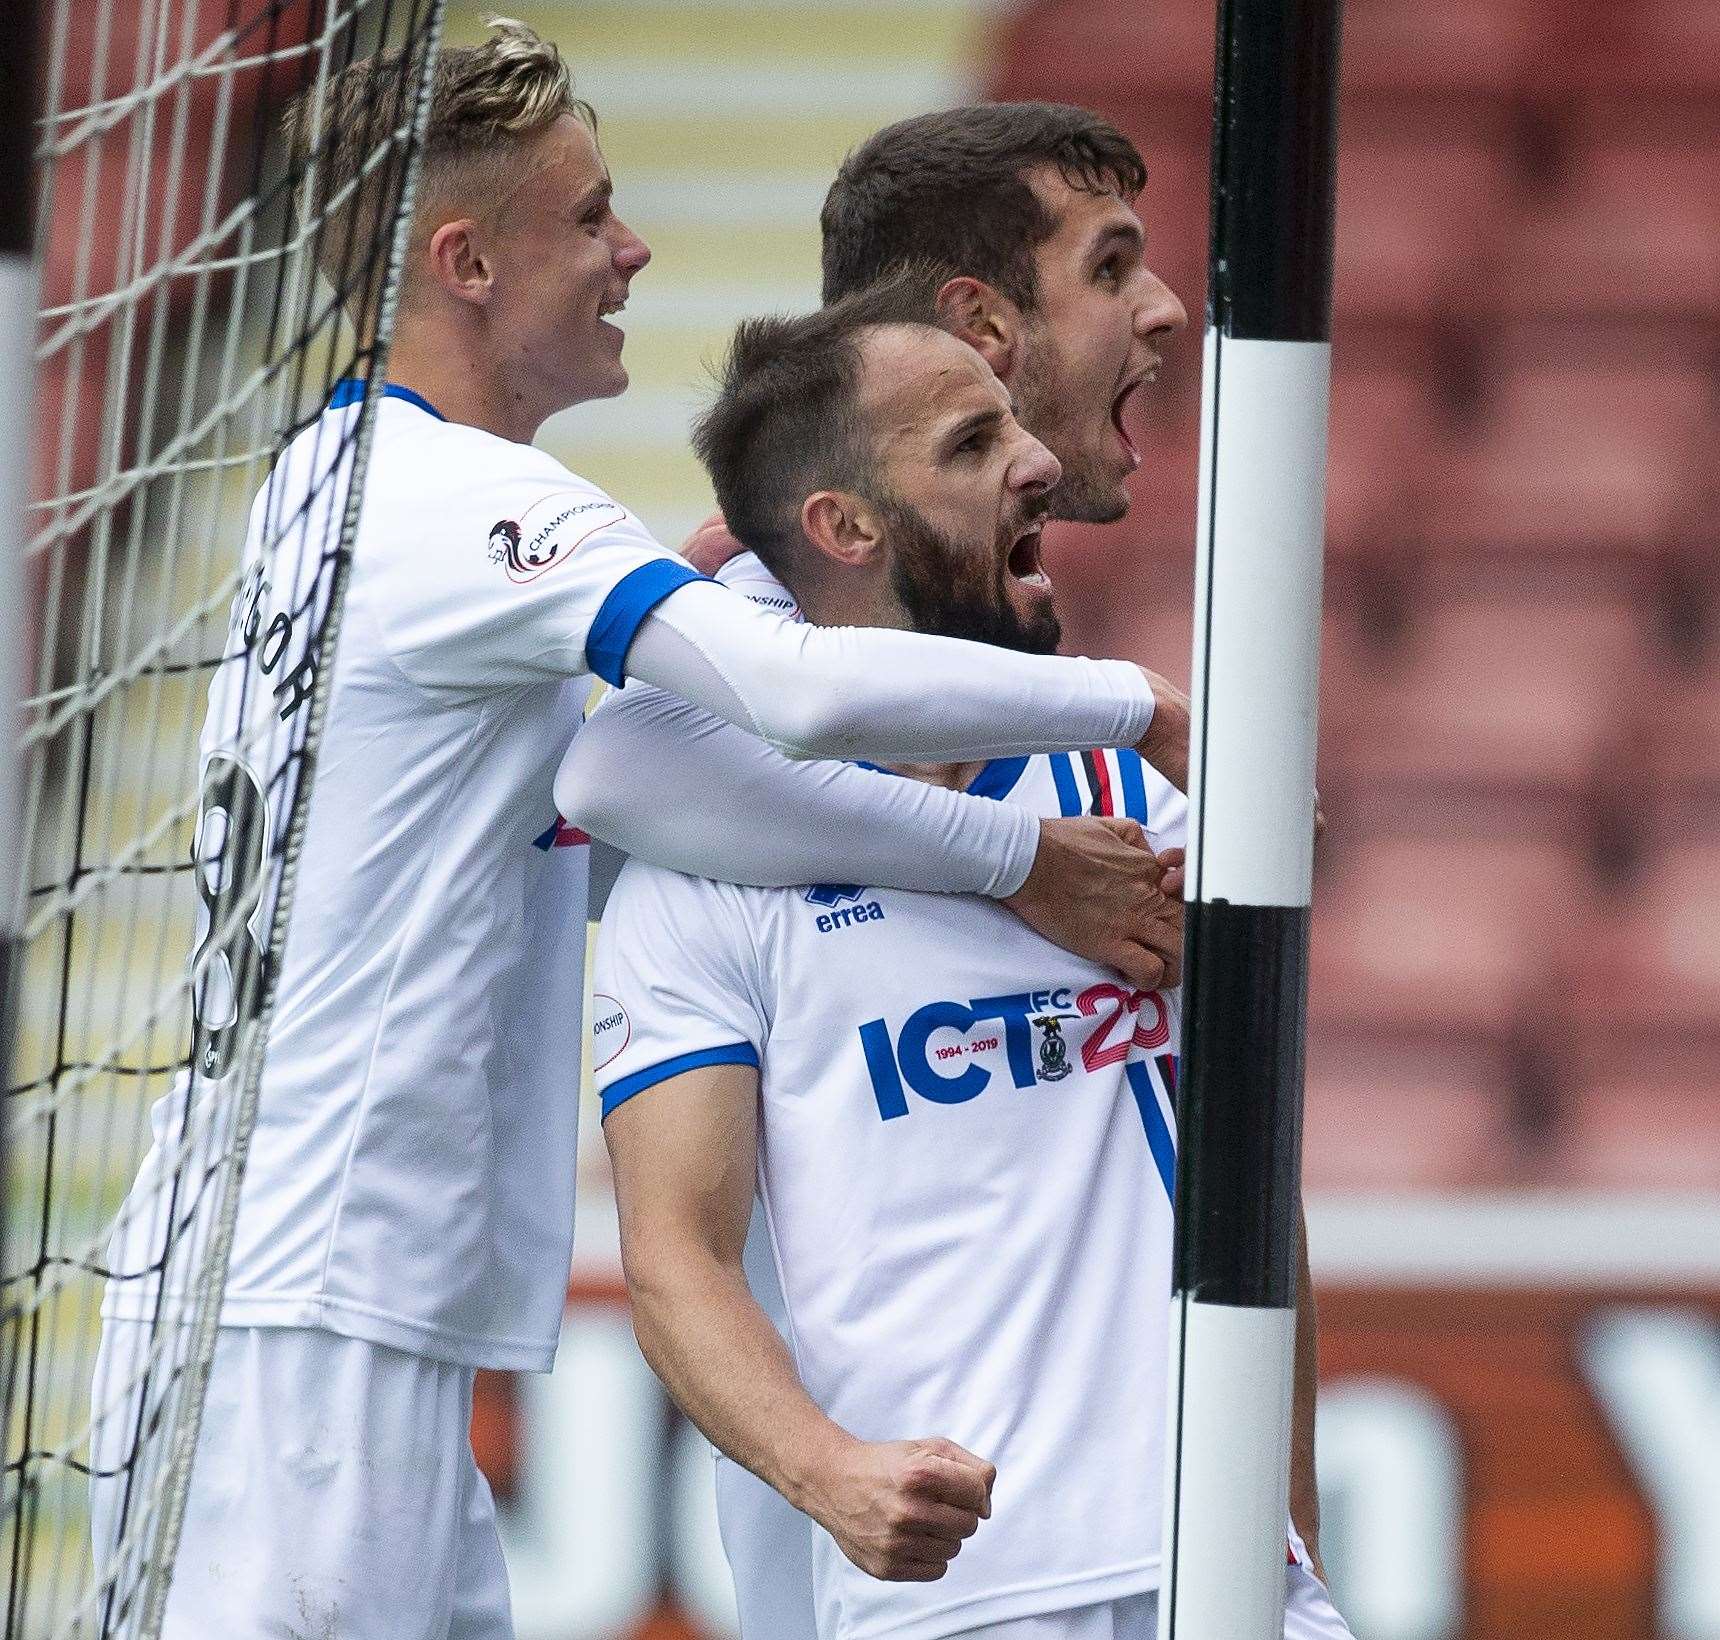 Sean Welsh opened the scoring for Inverness.